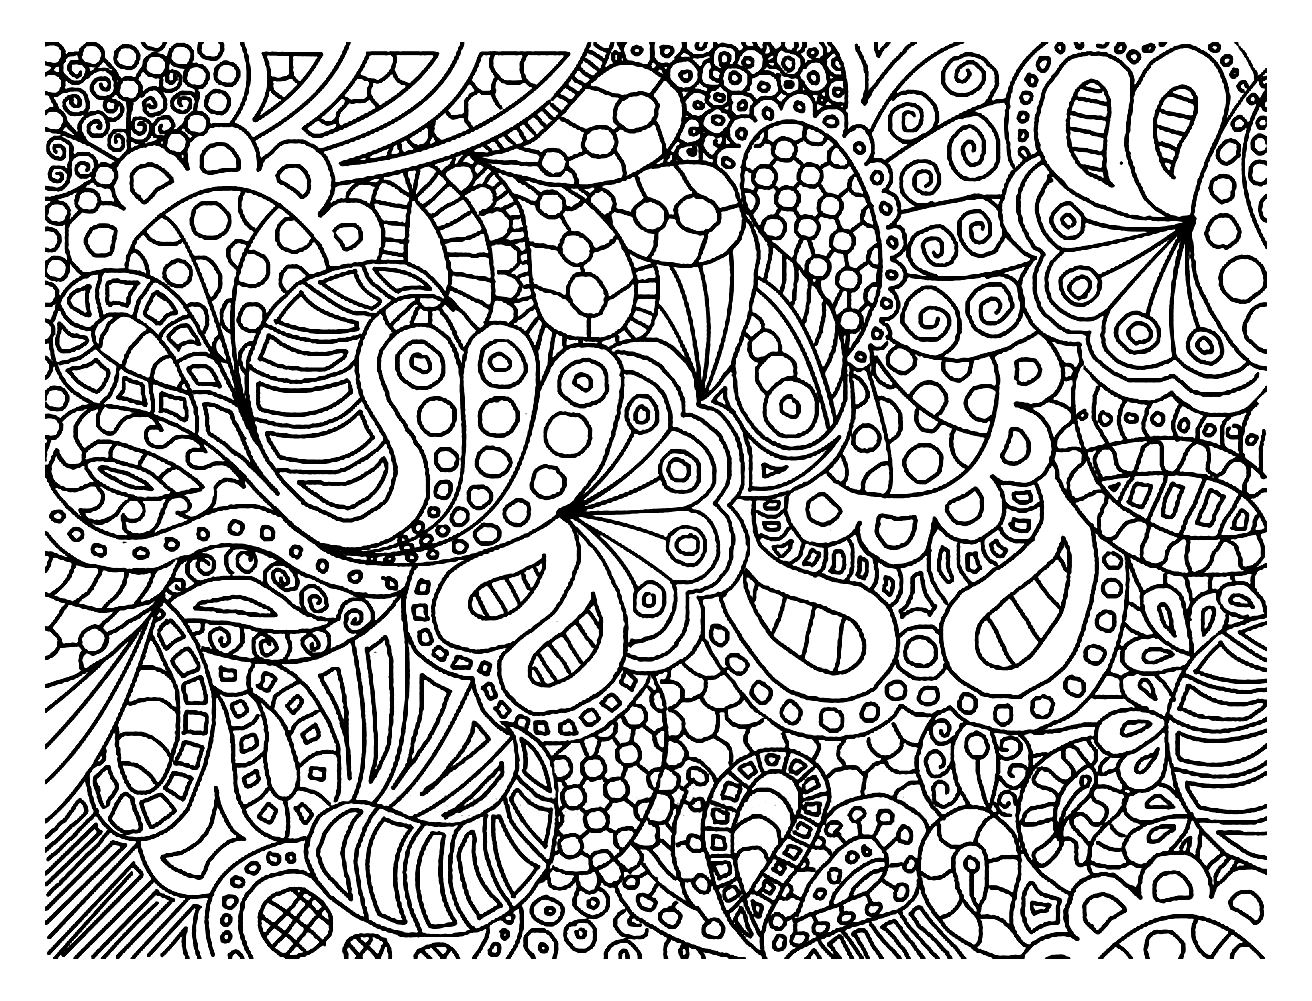 Doodle Art Doodling 2 Doodle Art Doodling Adult Coloring Pages